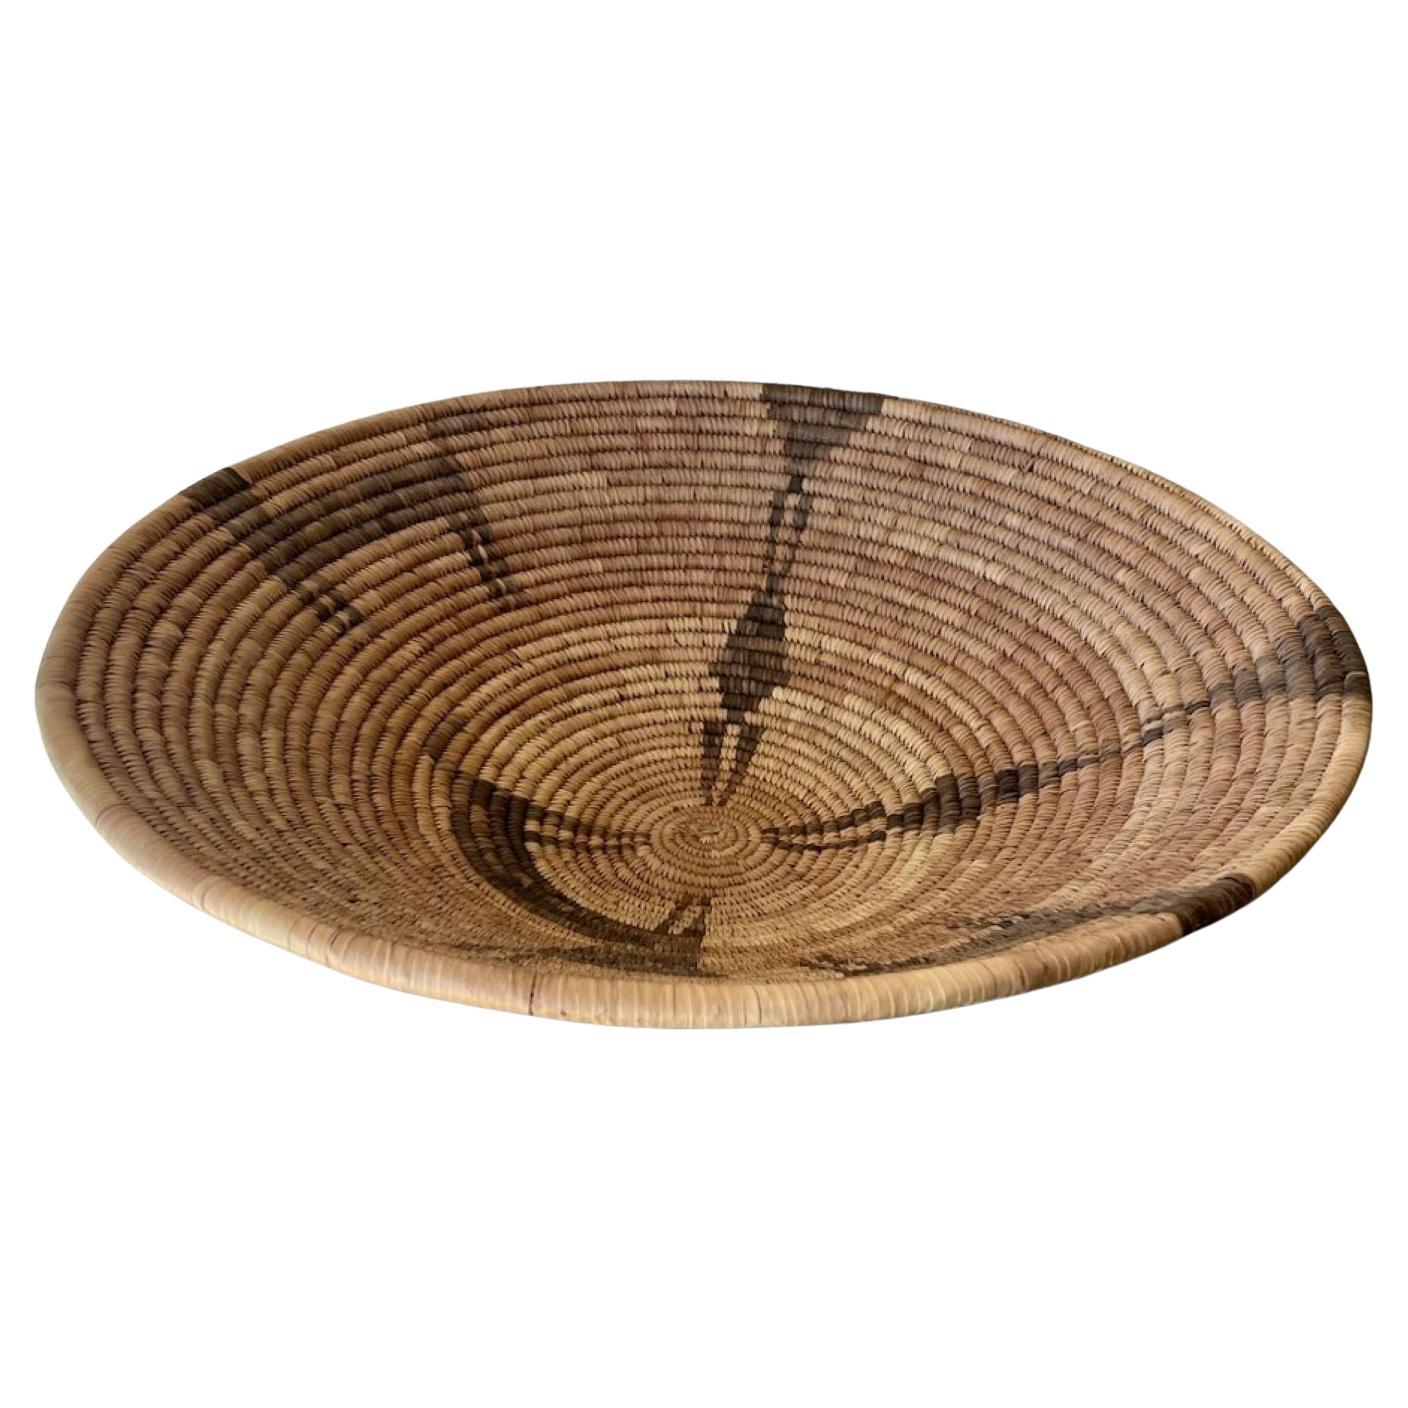 Papago Indian Woven Basket with Pictorial Motif